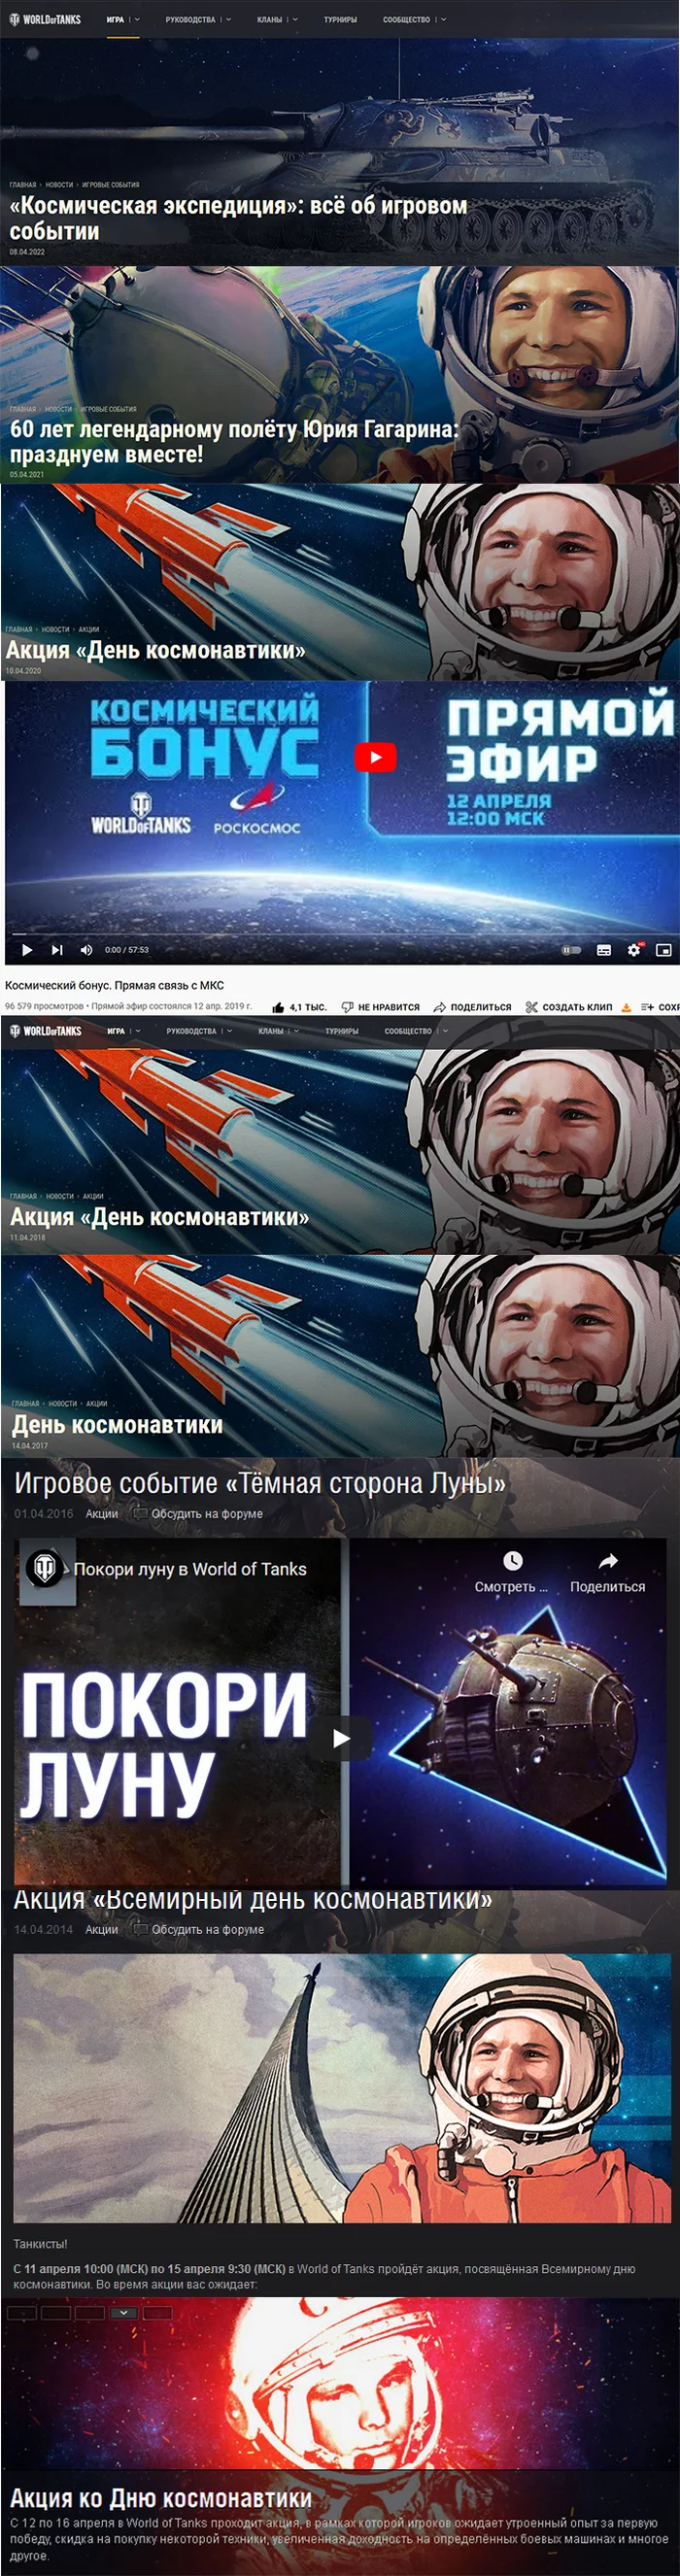 Cosmonautics Day without mentioning Yuri Gagarin and the words Cosmonautics Day for the first time in 6 years. Wargaming - Longpost, Yuri Gagarin, April 12 - Cosmonautics Day, Russia, Politics